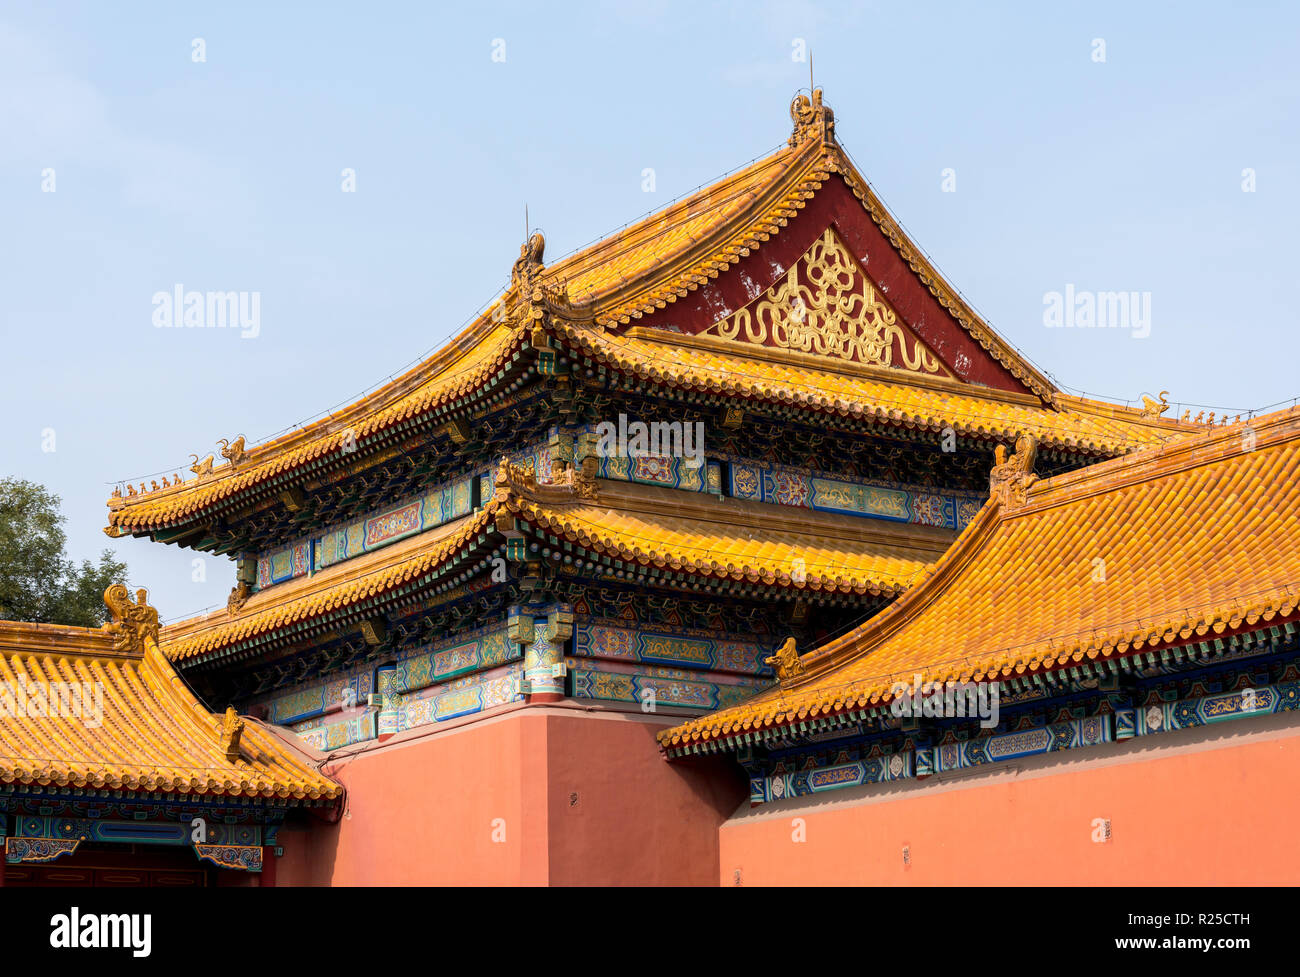 Details of roof and carvings in Forbidden City in Beijing Stock Photo